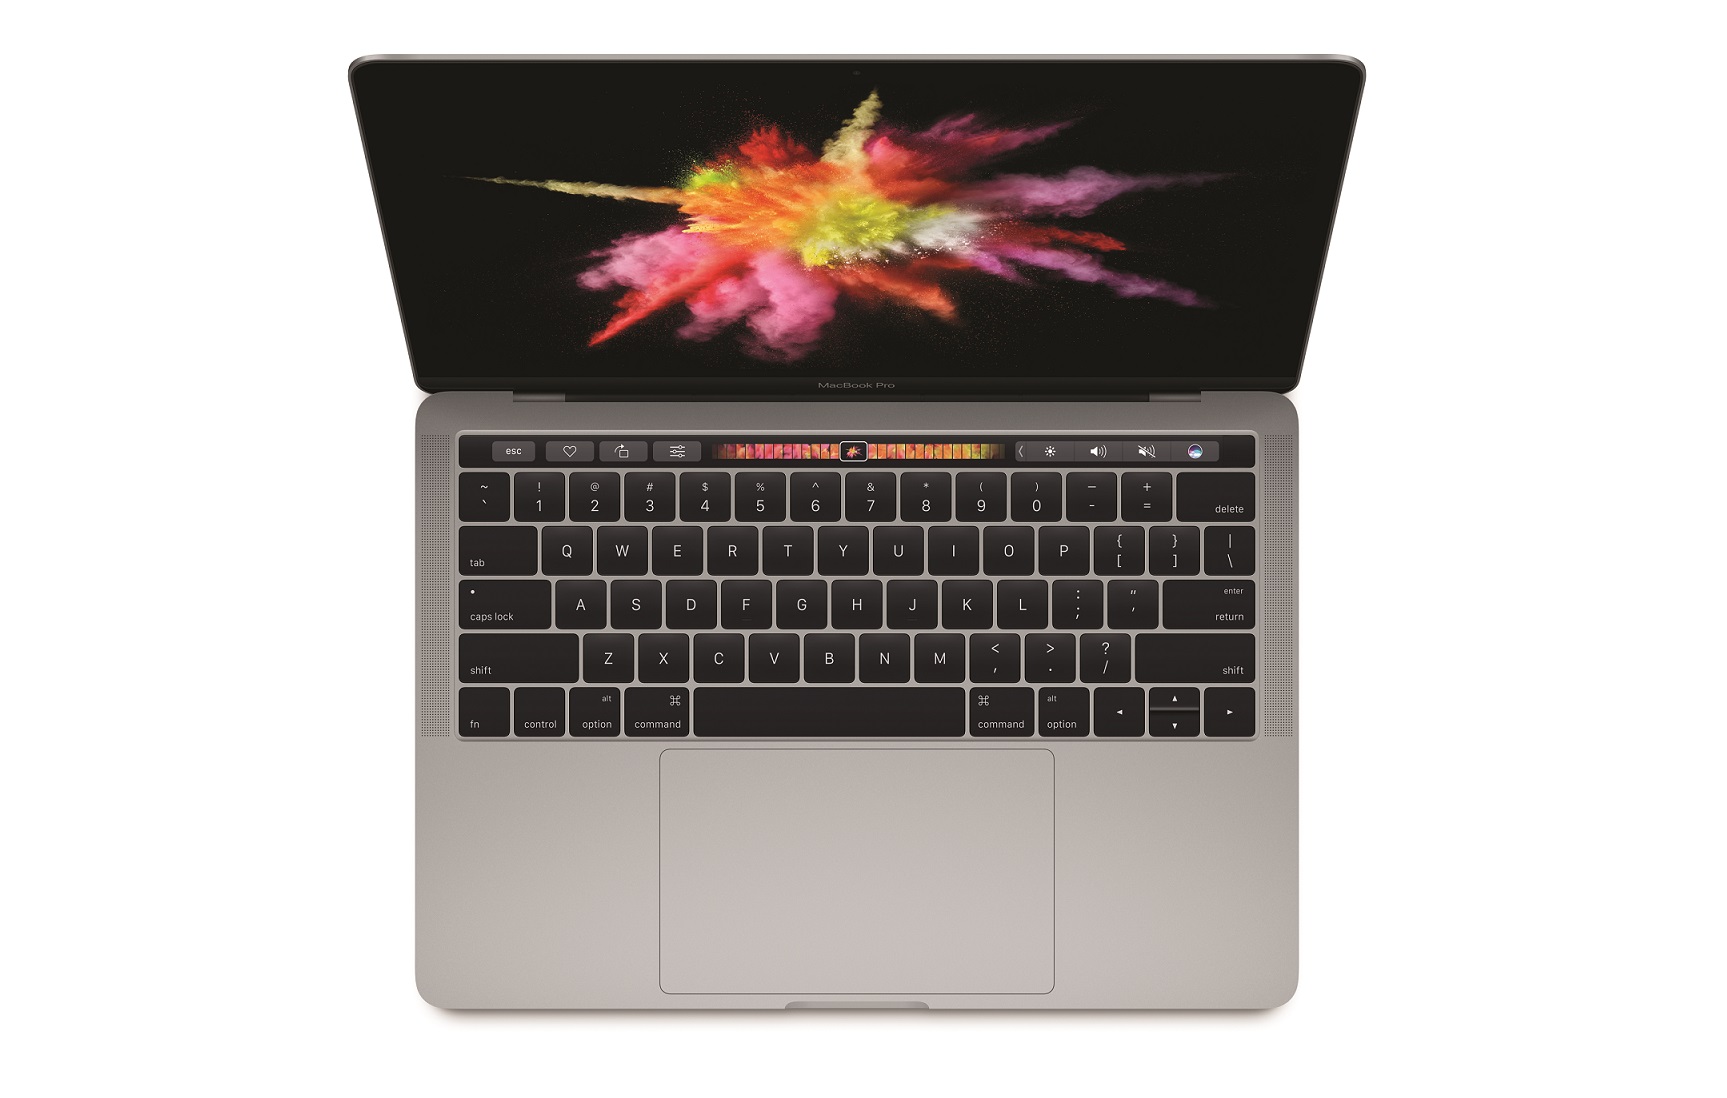 New MacBook Pros Not Offering 32GB RAM Due to Battery Life, According to Apple